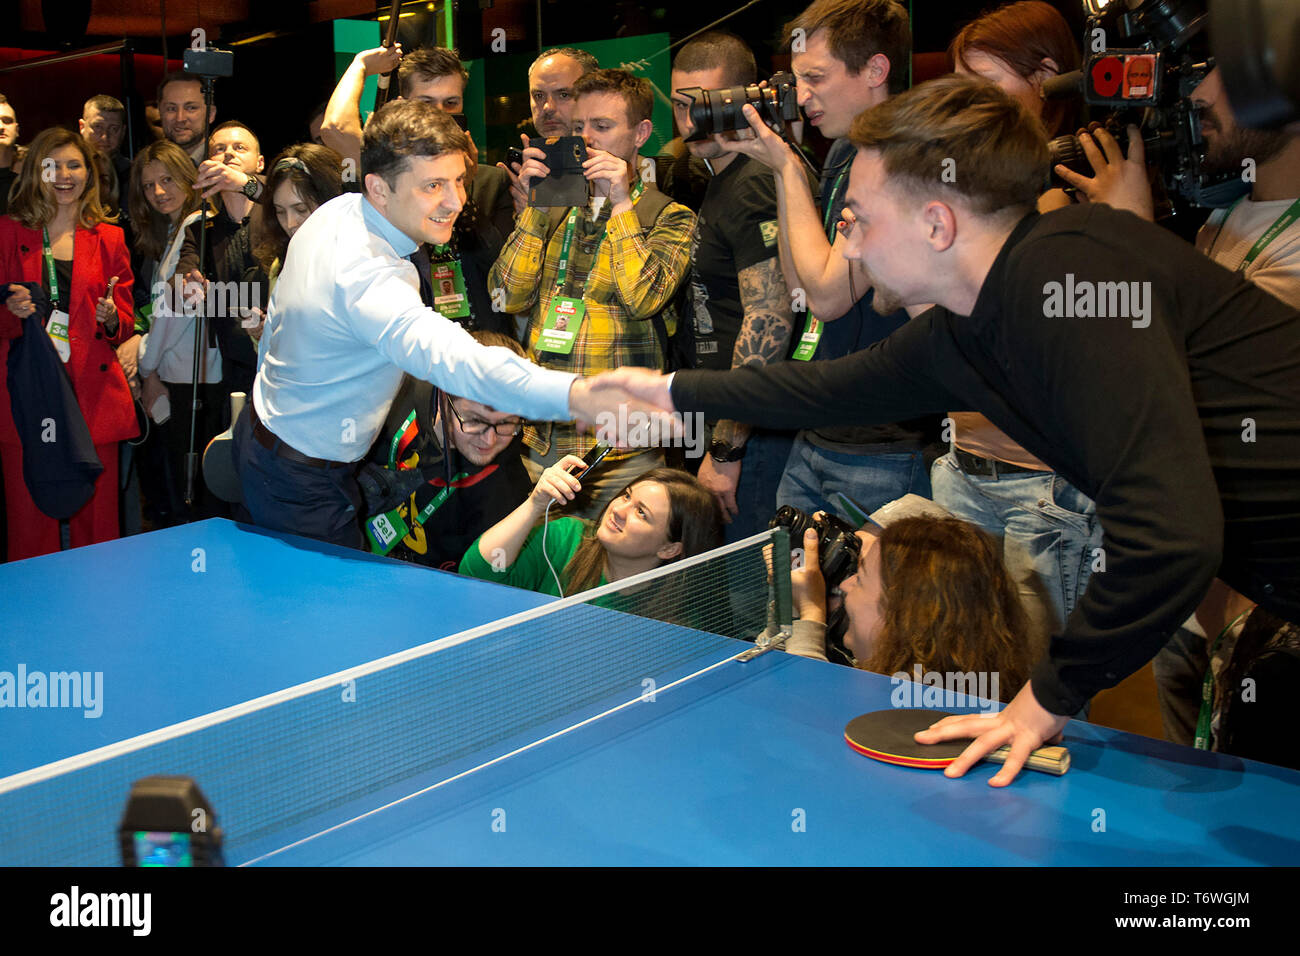 Ukrainian comic actor and presidential candidate Volodymyr Zelenskiy playing table tennis at his campaign headquarters following the presidential election in Kiev, Ukraine.  Featuring: Volodymyr Zelenskiy Where: Kiev, Ukraine When: 31 Mar 2019 Credit: IPA/WENN.com  **Only available for publication in UK, USA, Germany, Austria, Switzerland** Stock Photo